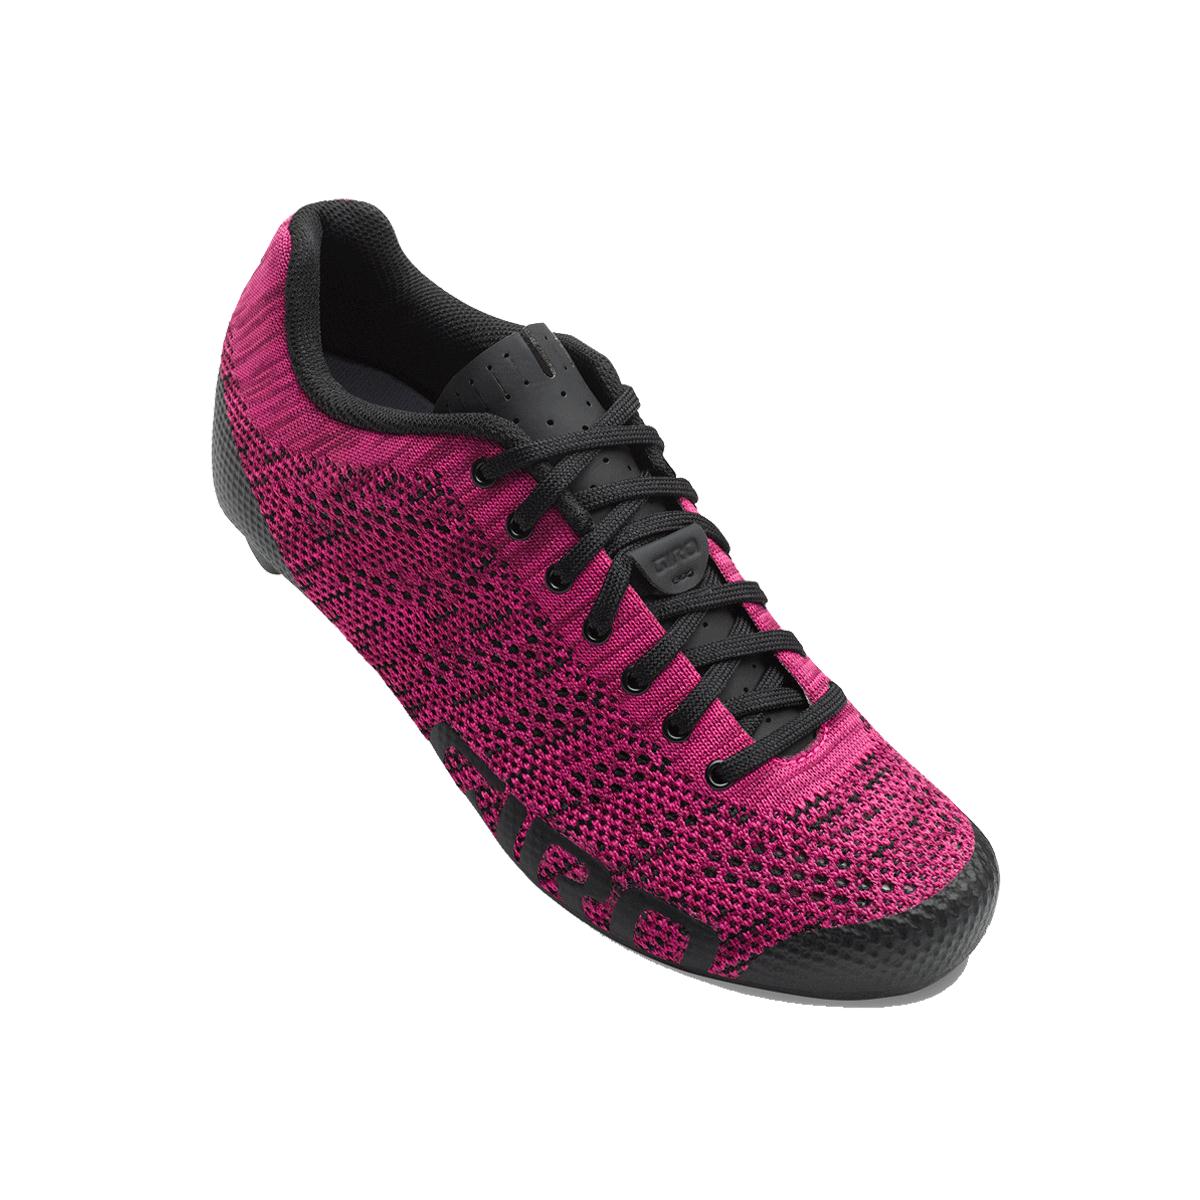 GIRO Empire E70 Knit Womens Road Cycling Shoes 2018 Berry/Bright Pink 39